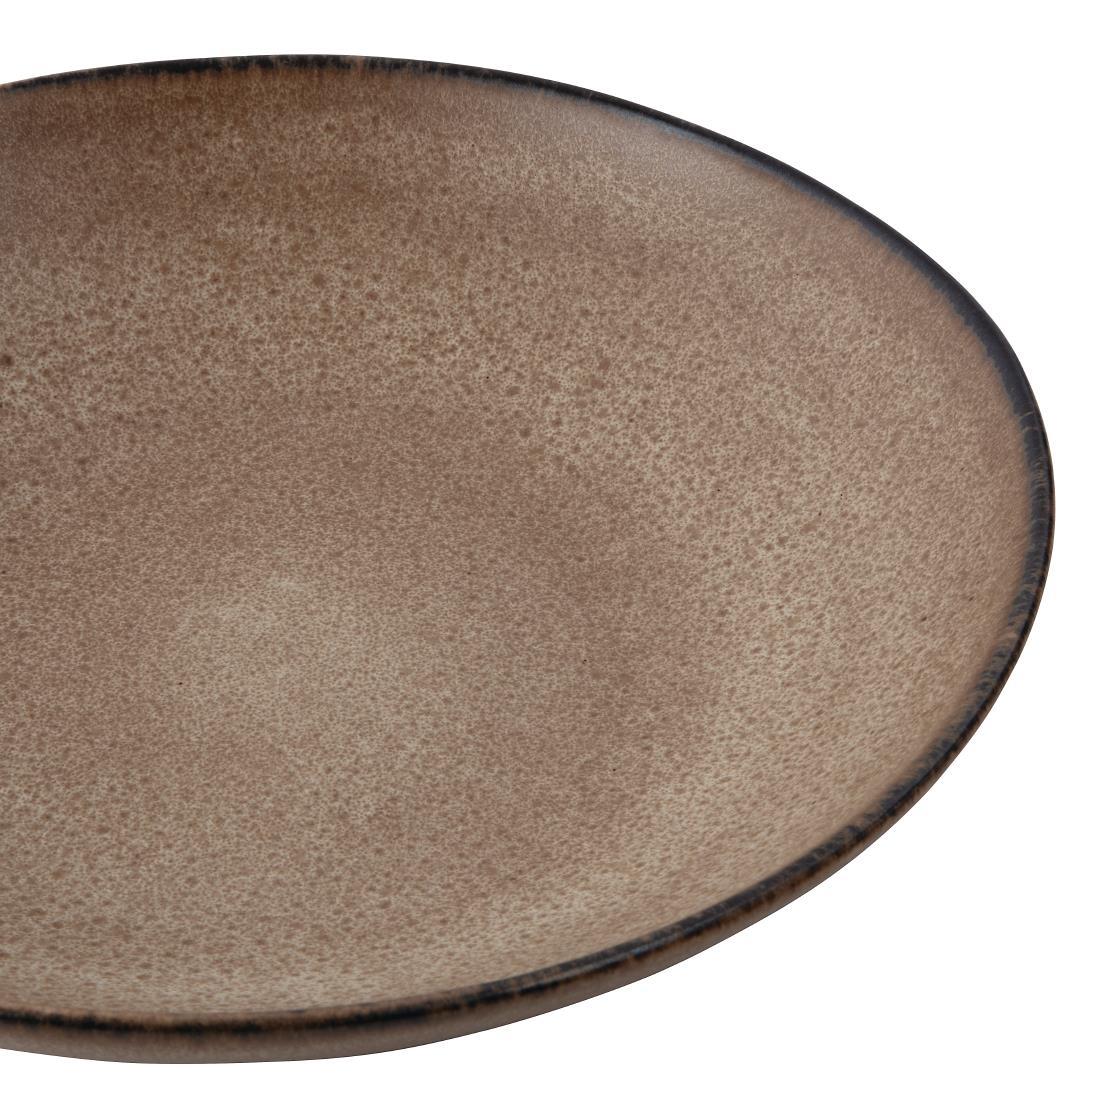 Olympia Build-a-Bowl Earth Flat Bowls 250mm (Pack of 4) - FC735  - 4